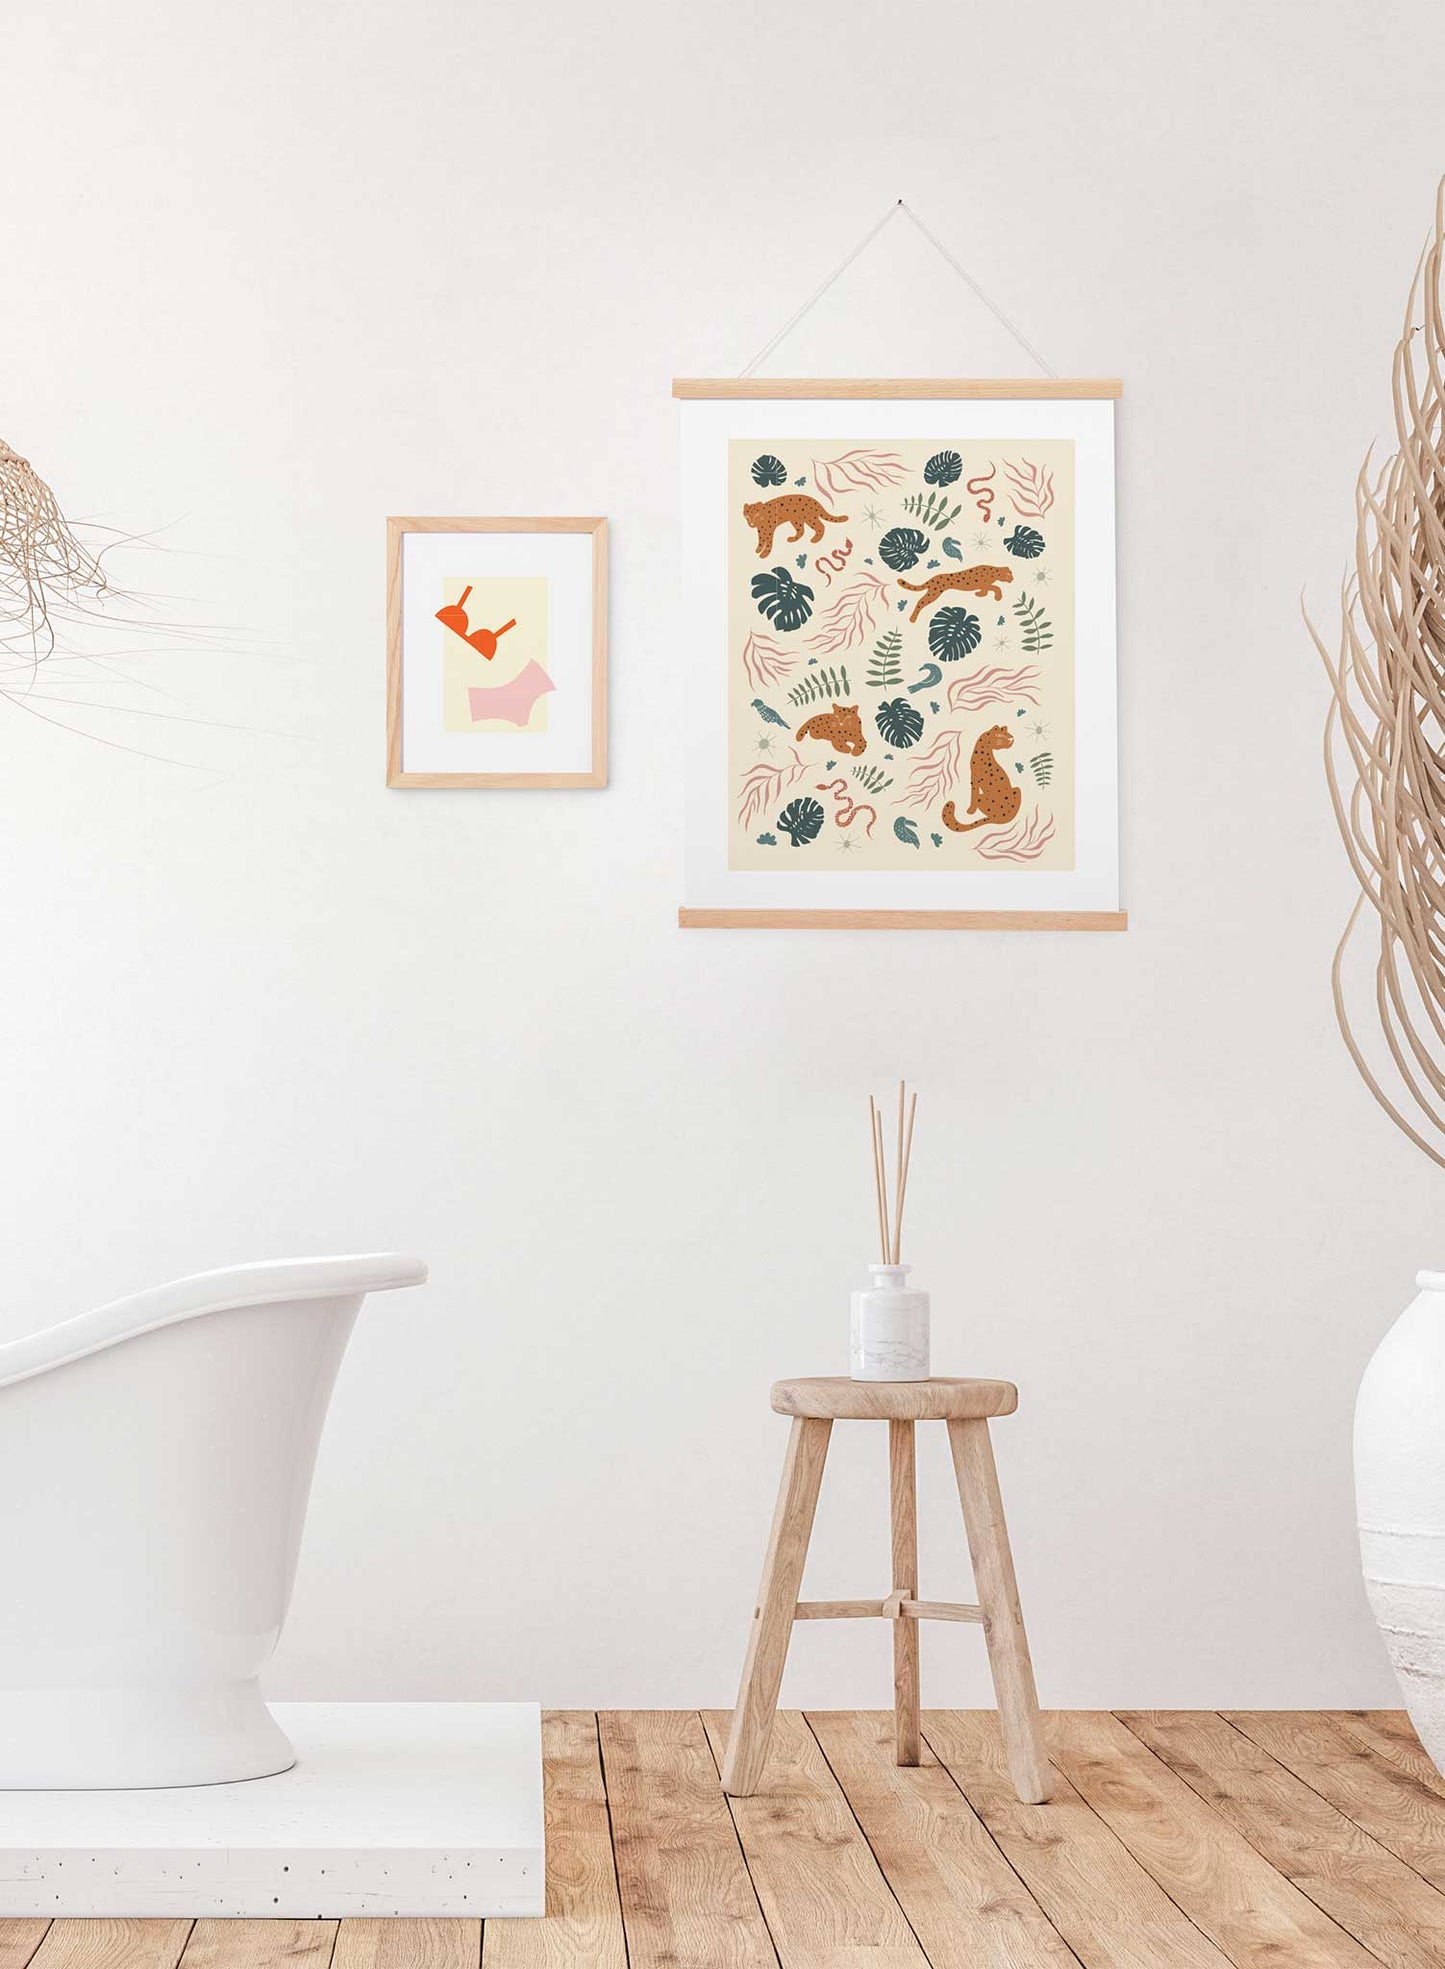 Savana Stroll is a minimalist illustration of four cheetahs and a collection of plants that can be found in the savanna by Opposite Wall.